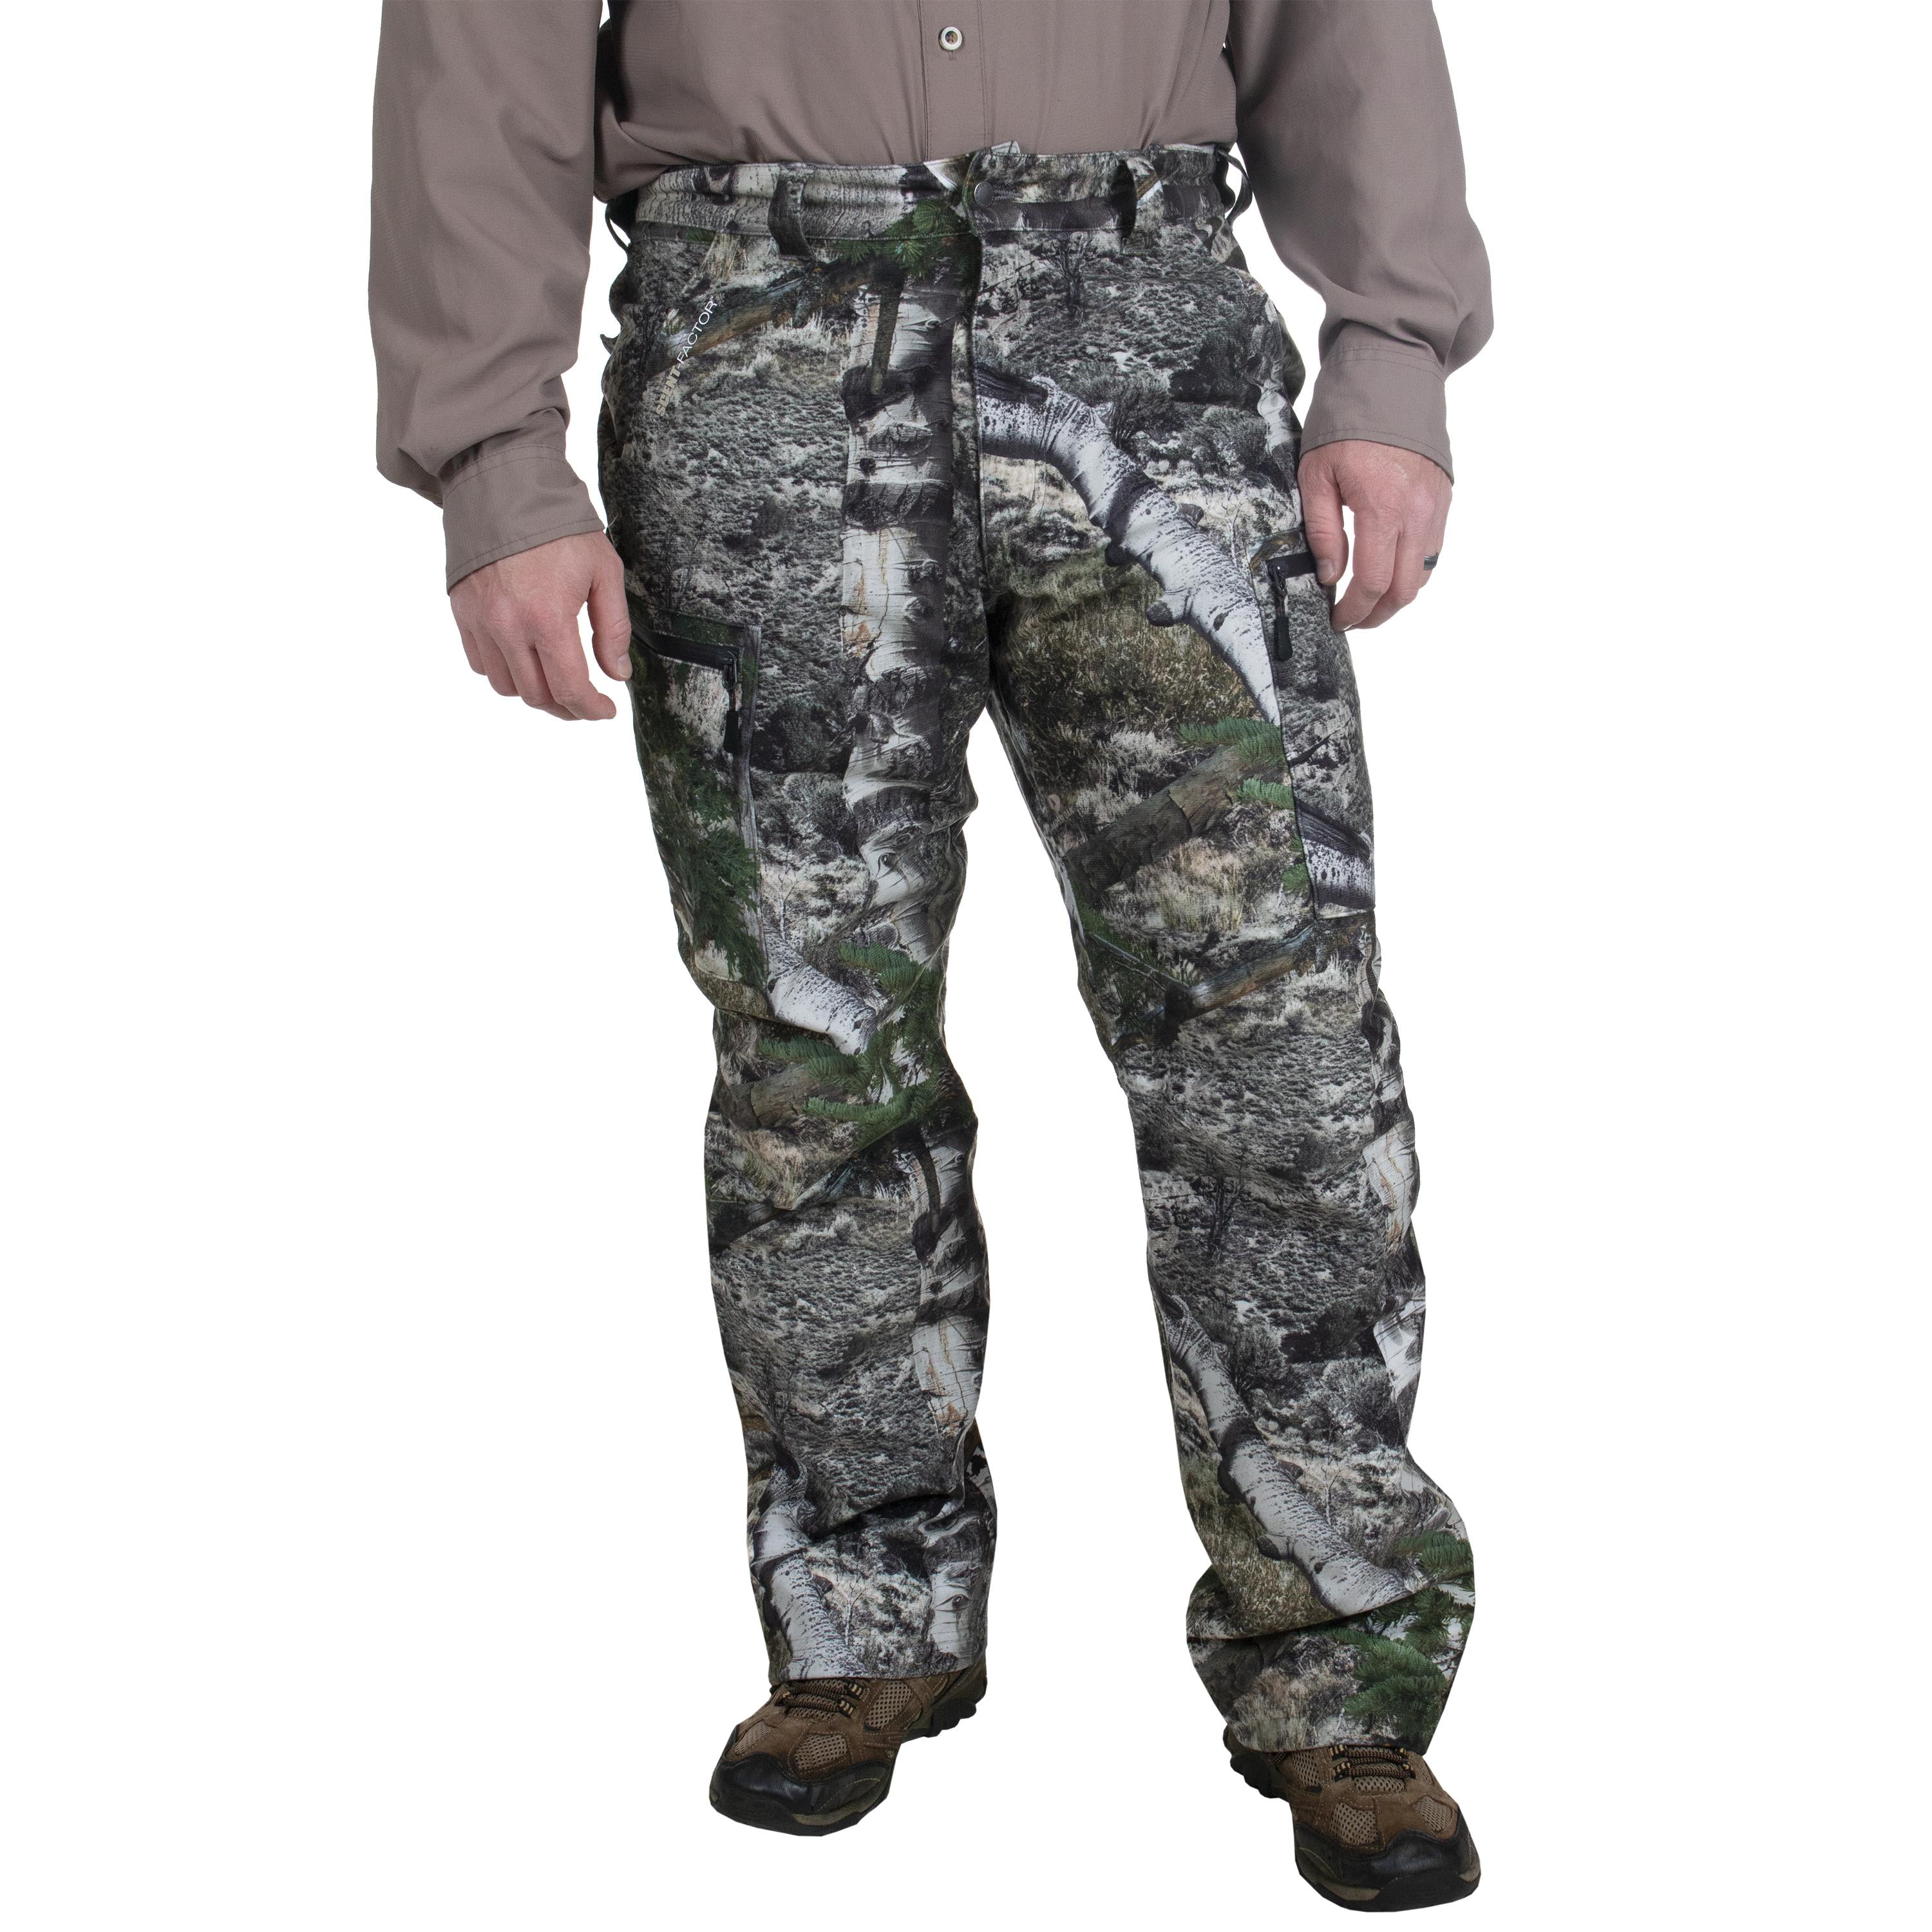 Stealth Trousers tree fishing hunting shooting camo camouflage bottom M-5X